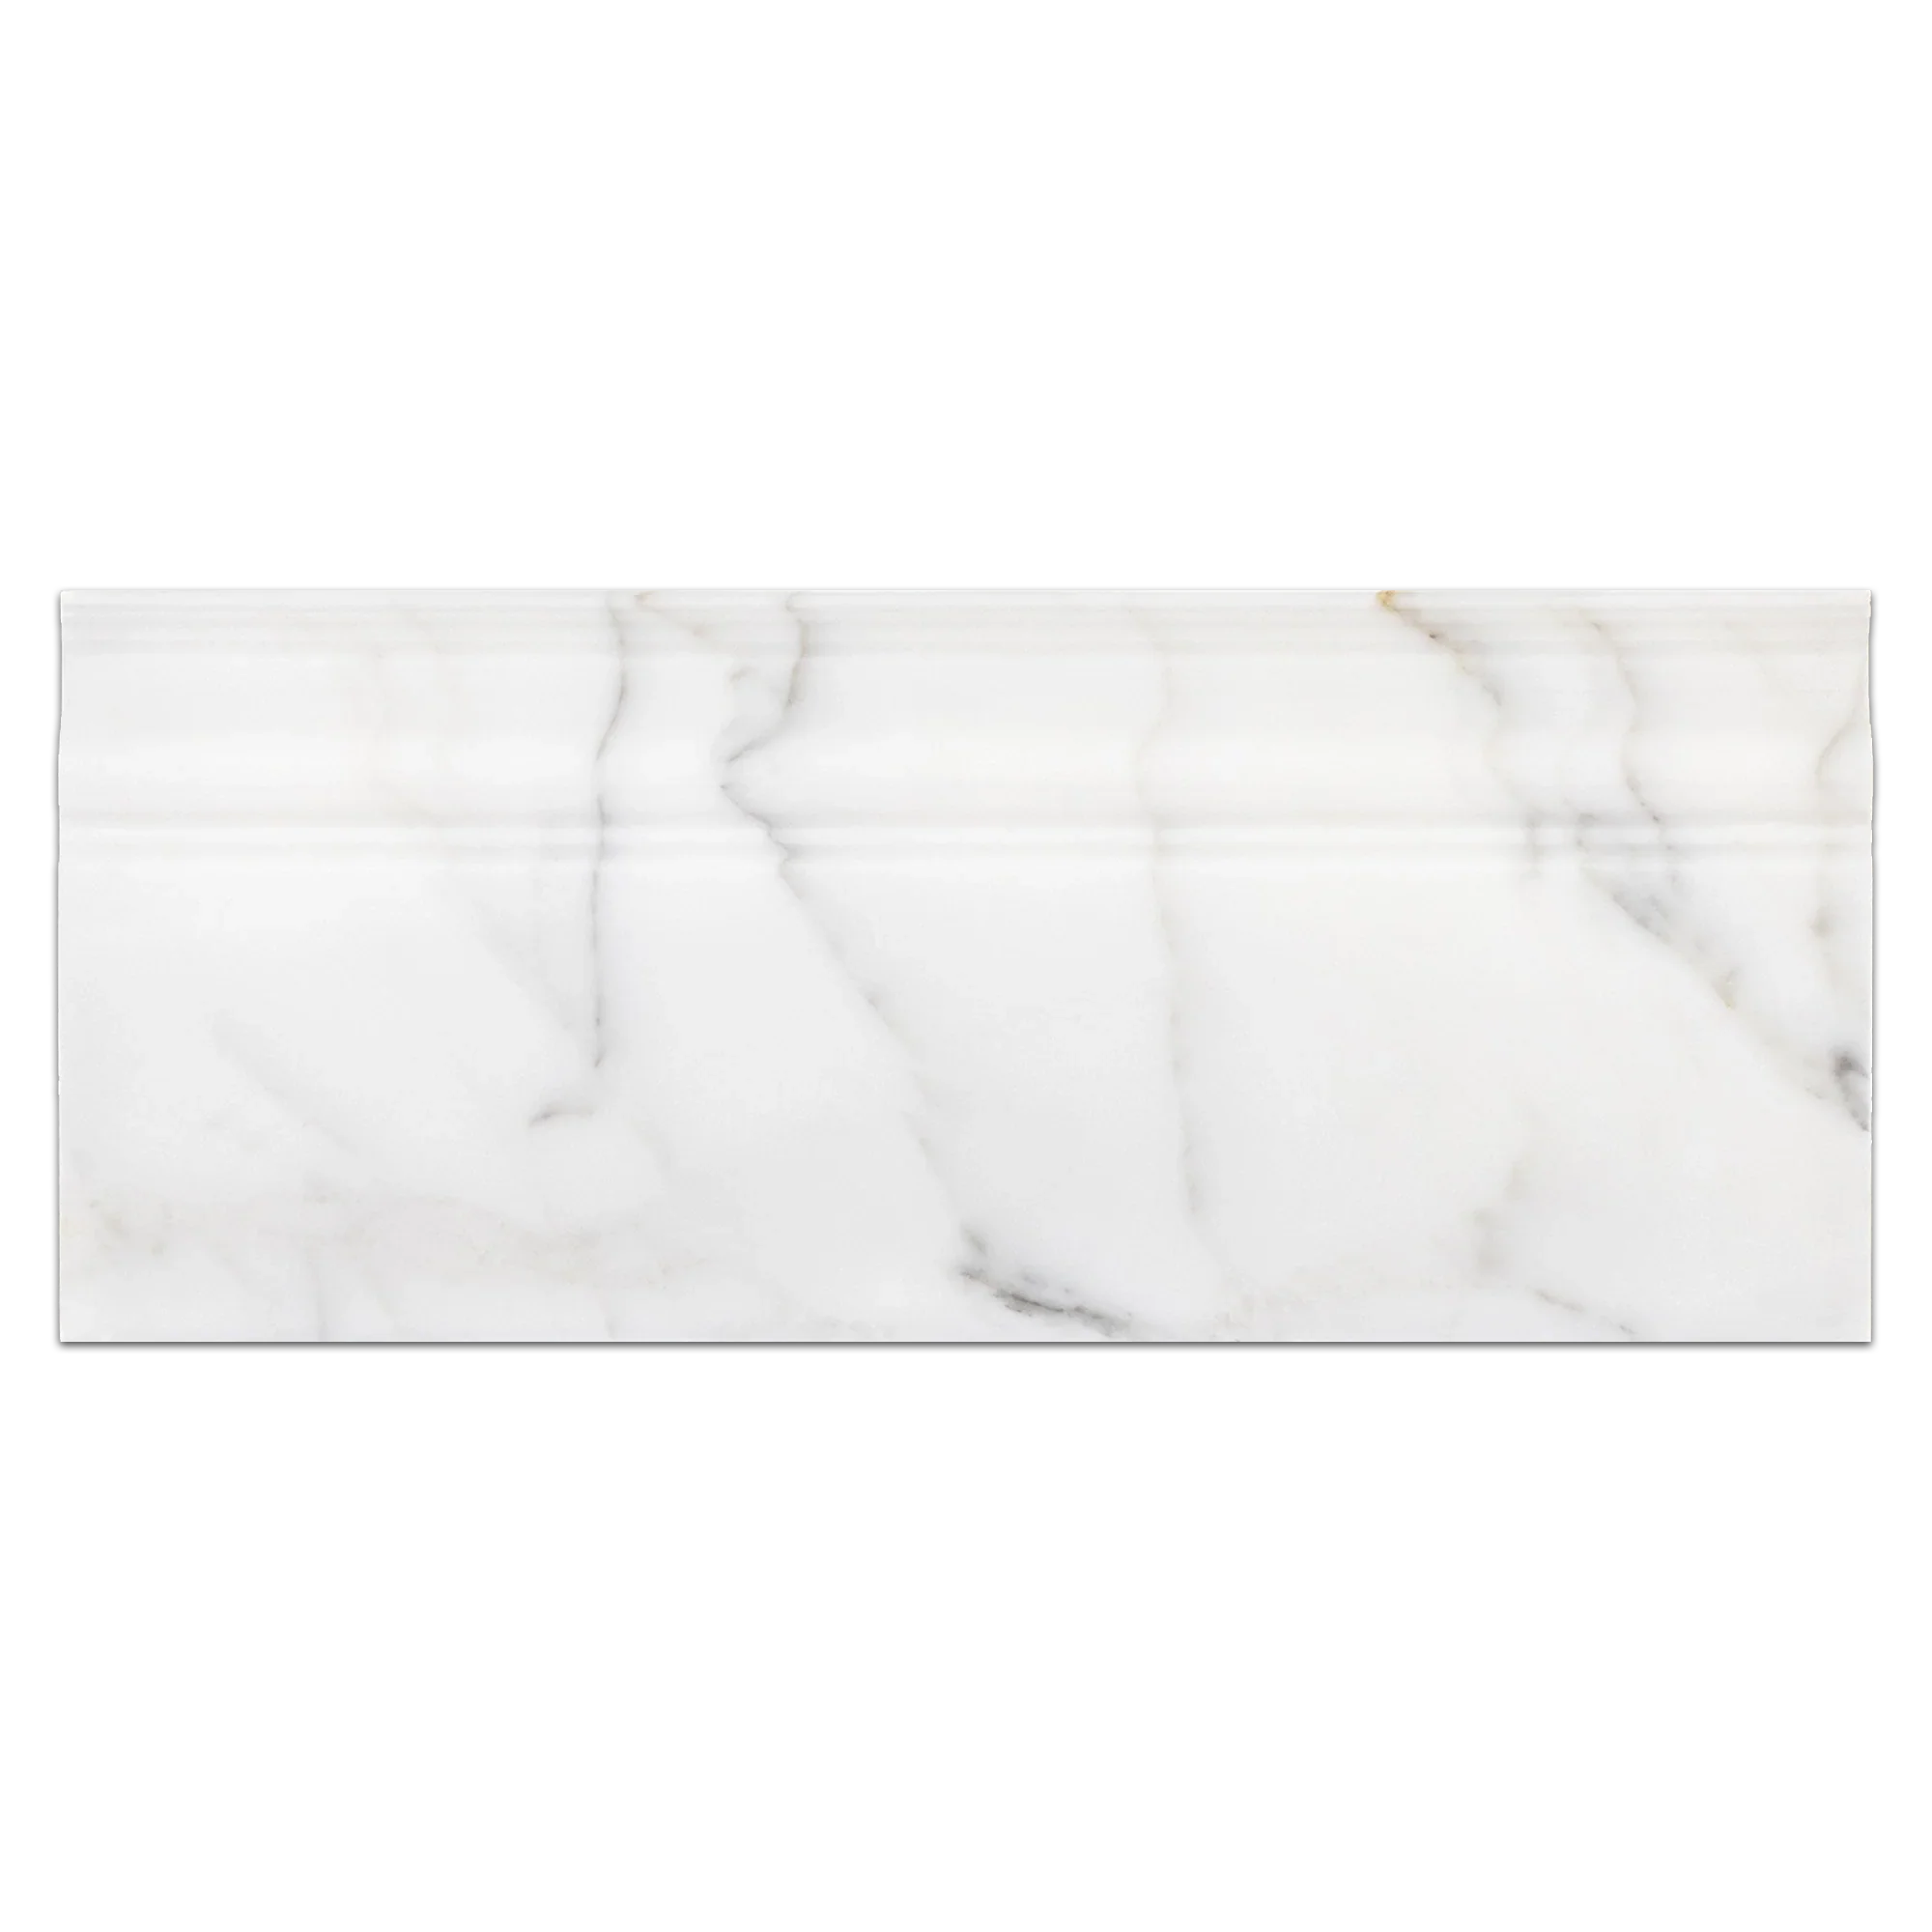 Elon Calacatta Gold Marble Baseboard 4.75x12 Honed - Surface Group Online Tile Store